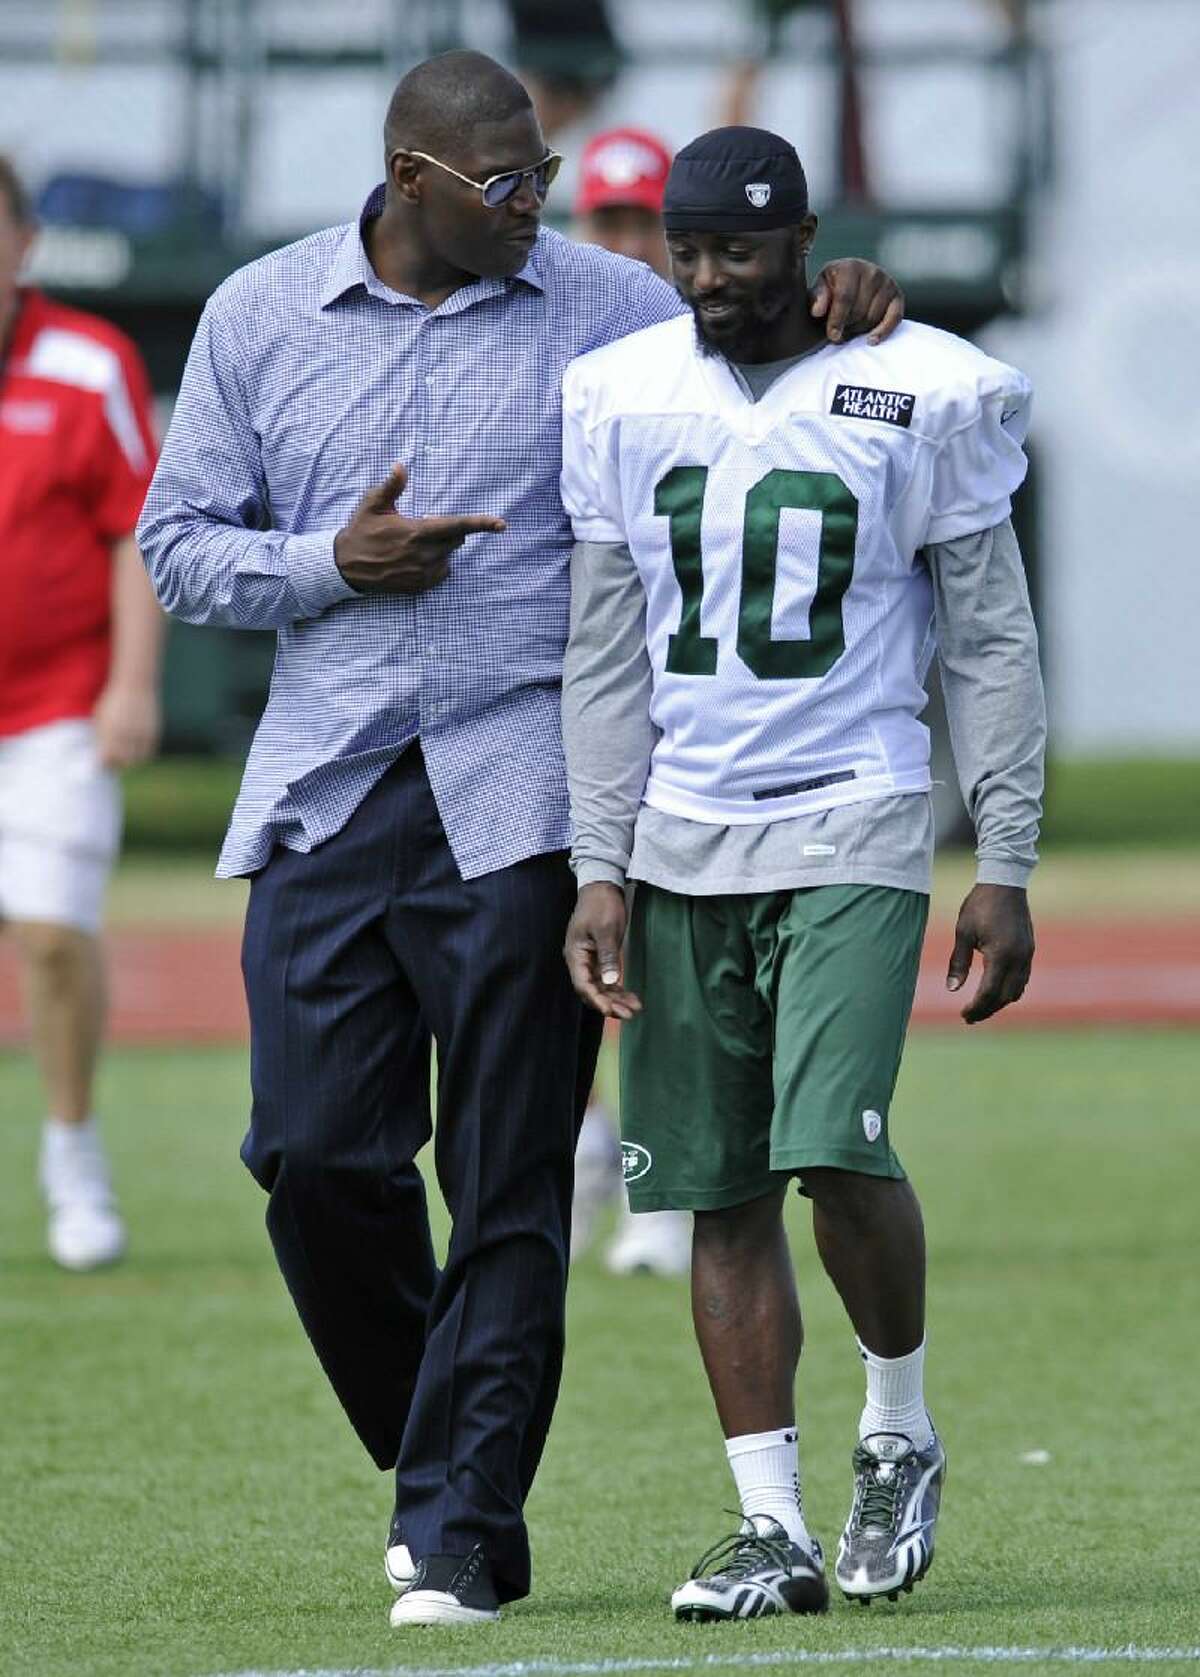 ASSOCIATED PRESS Former New York Jets receiver Keyshawn Johnson, left, talks with Jets wide receiver Santonio Holmes after practice on opening day of their training camp Friday in Cortland, N.Y.